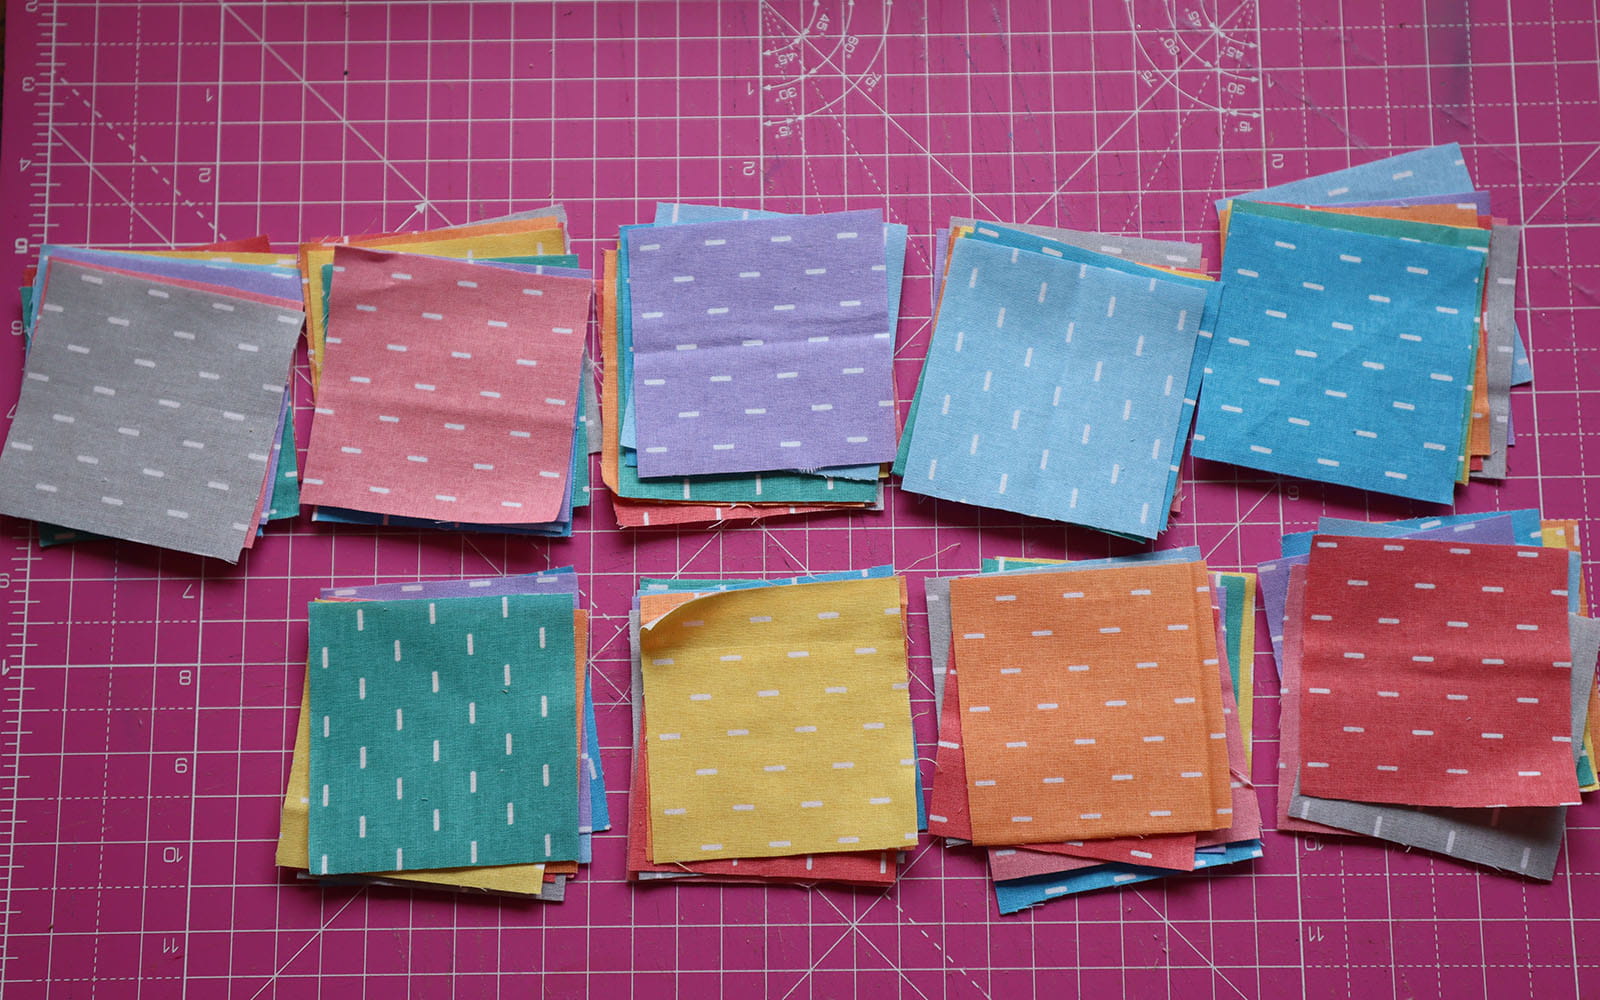 Nine stacks of sorted coloured fabric squares on pink cutting mat